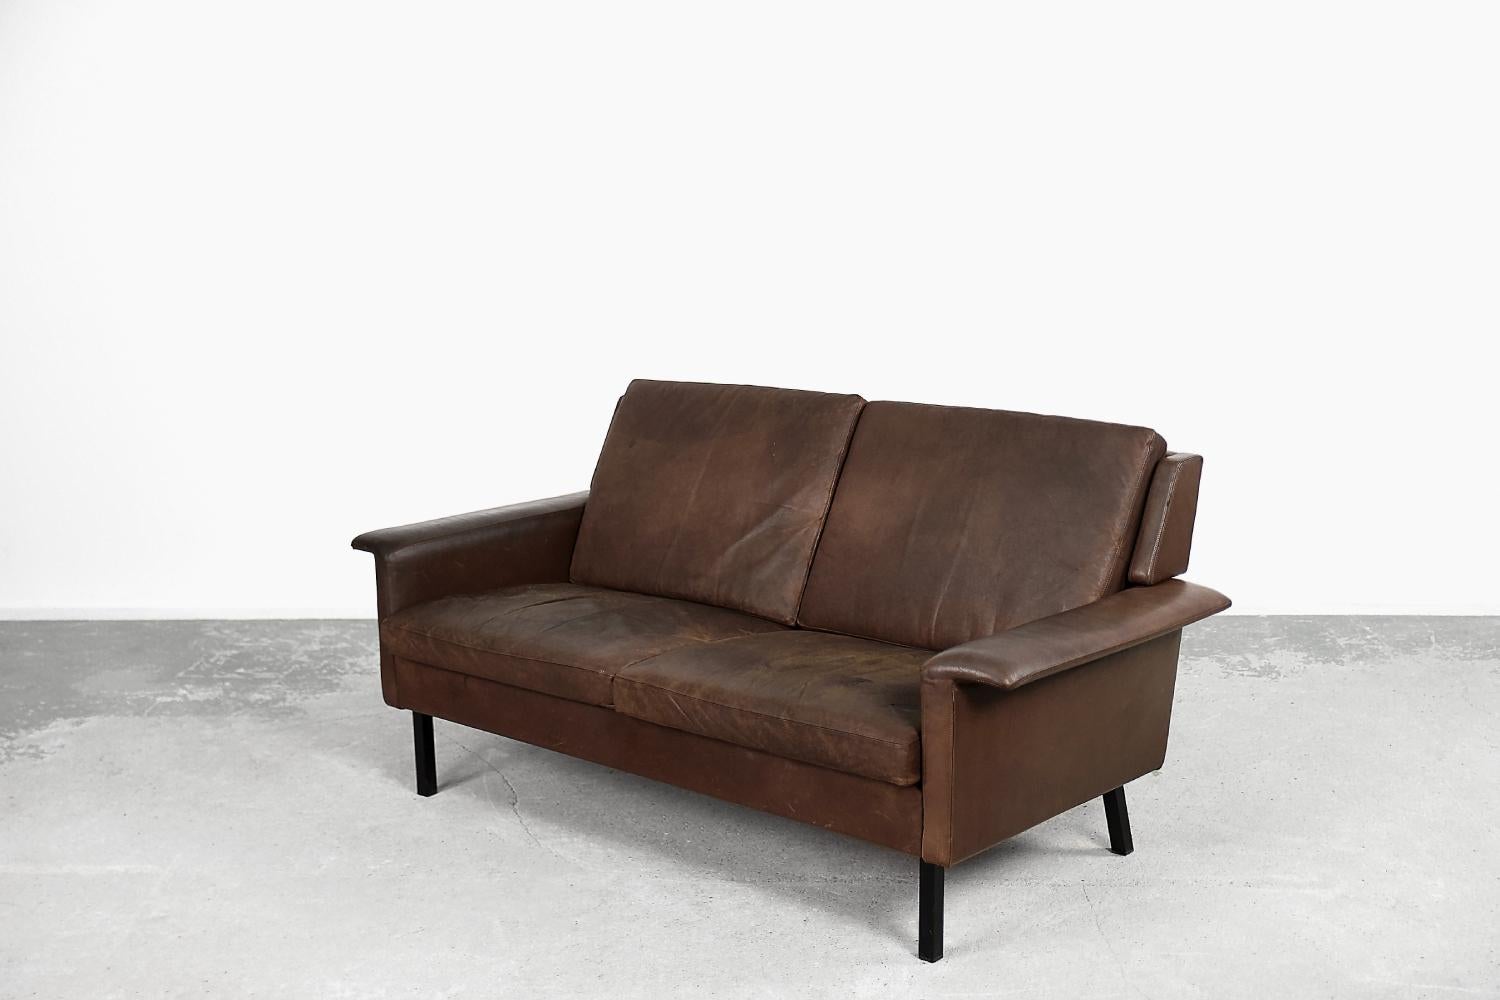 Mid-Century Modern 2-Seater Brown Leather Sofa3330 by A. Vodder for Fritz Hansen For Sale 4